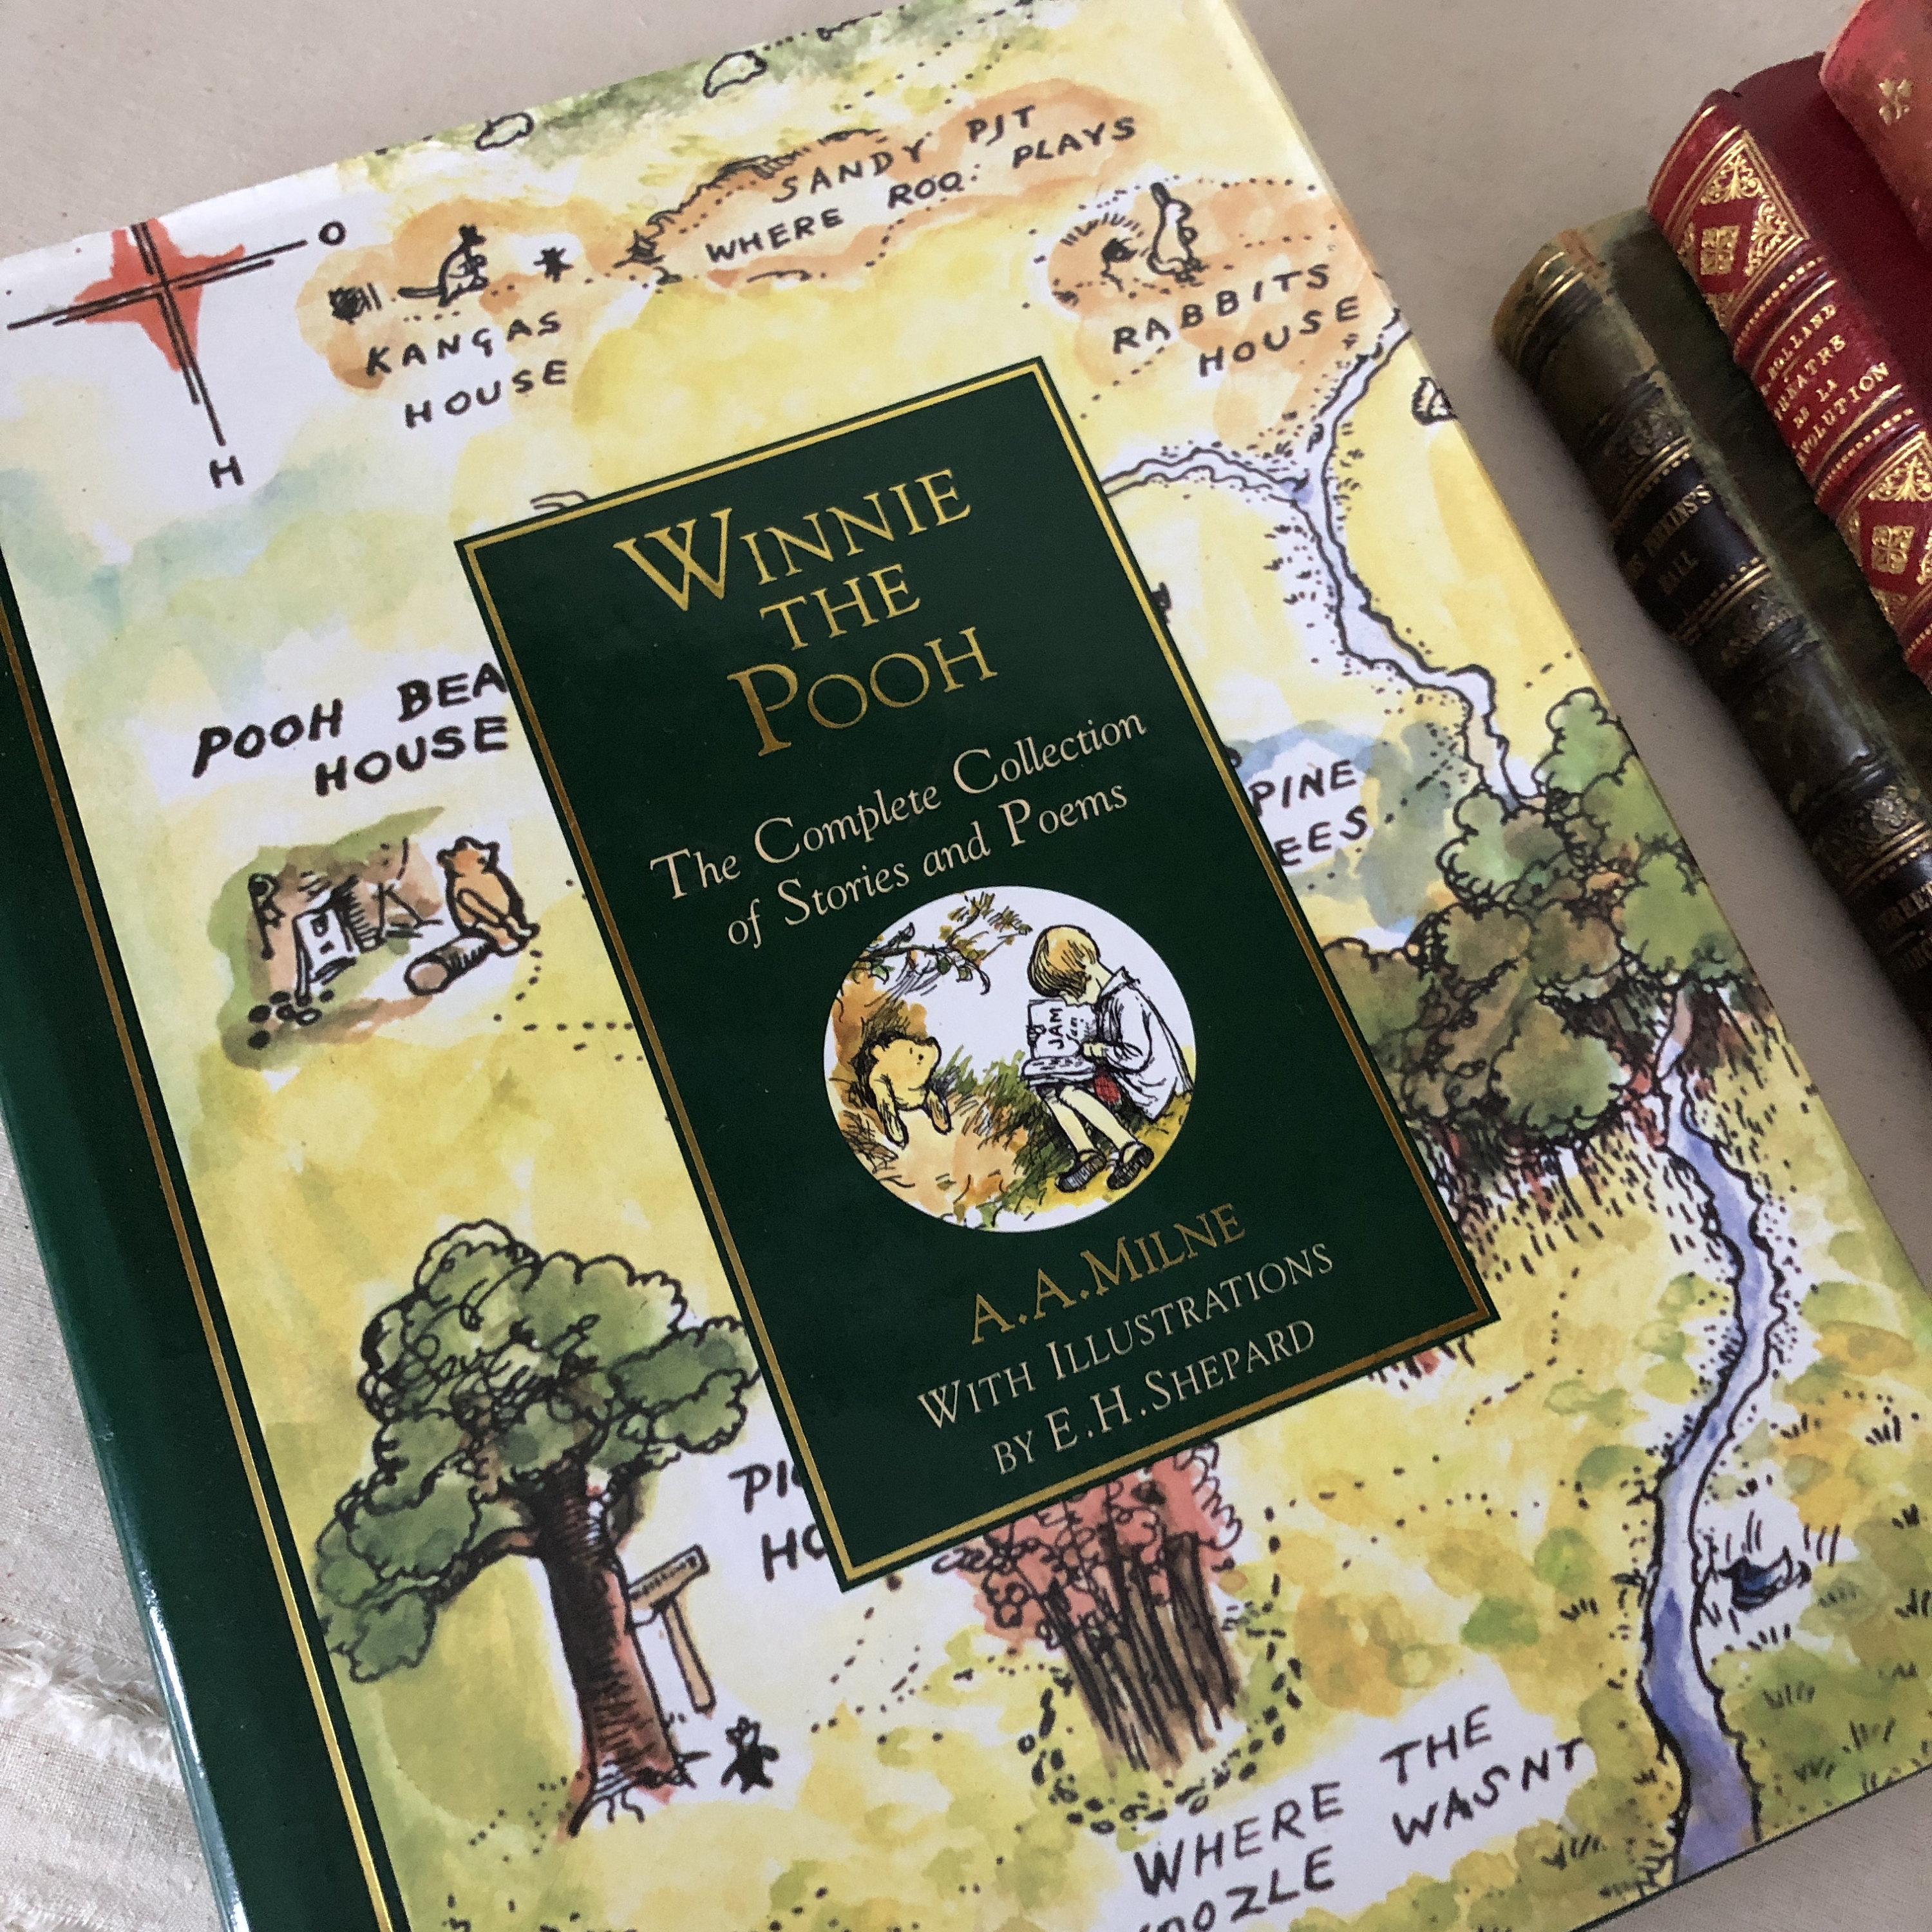 The Complete Stories and Poems of Winnie the Pooh by A A Milne Etsy 日本